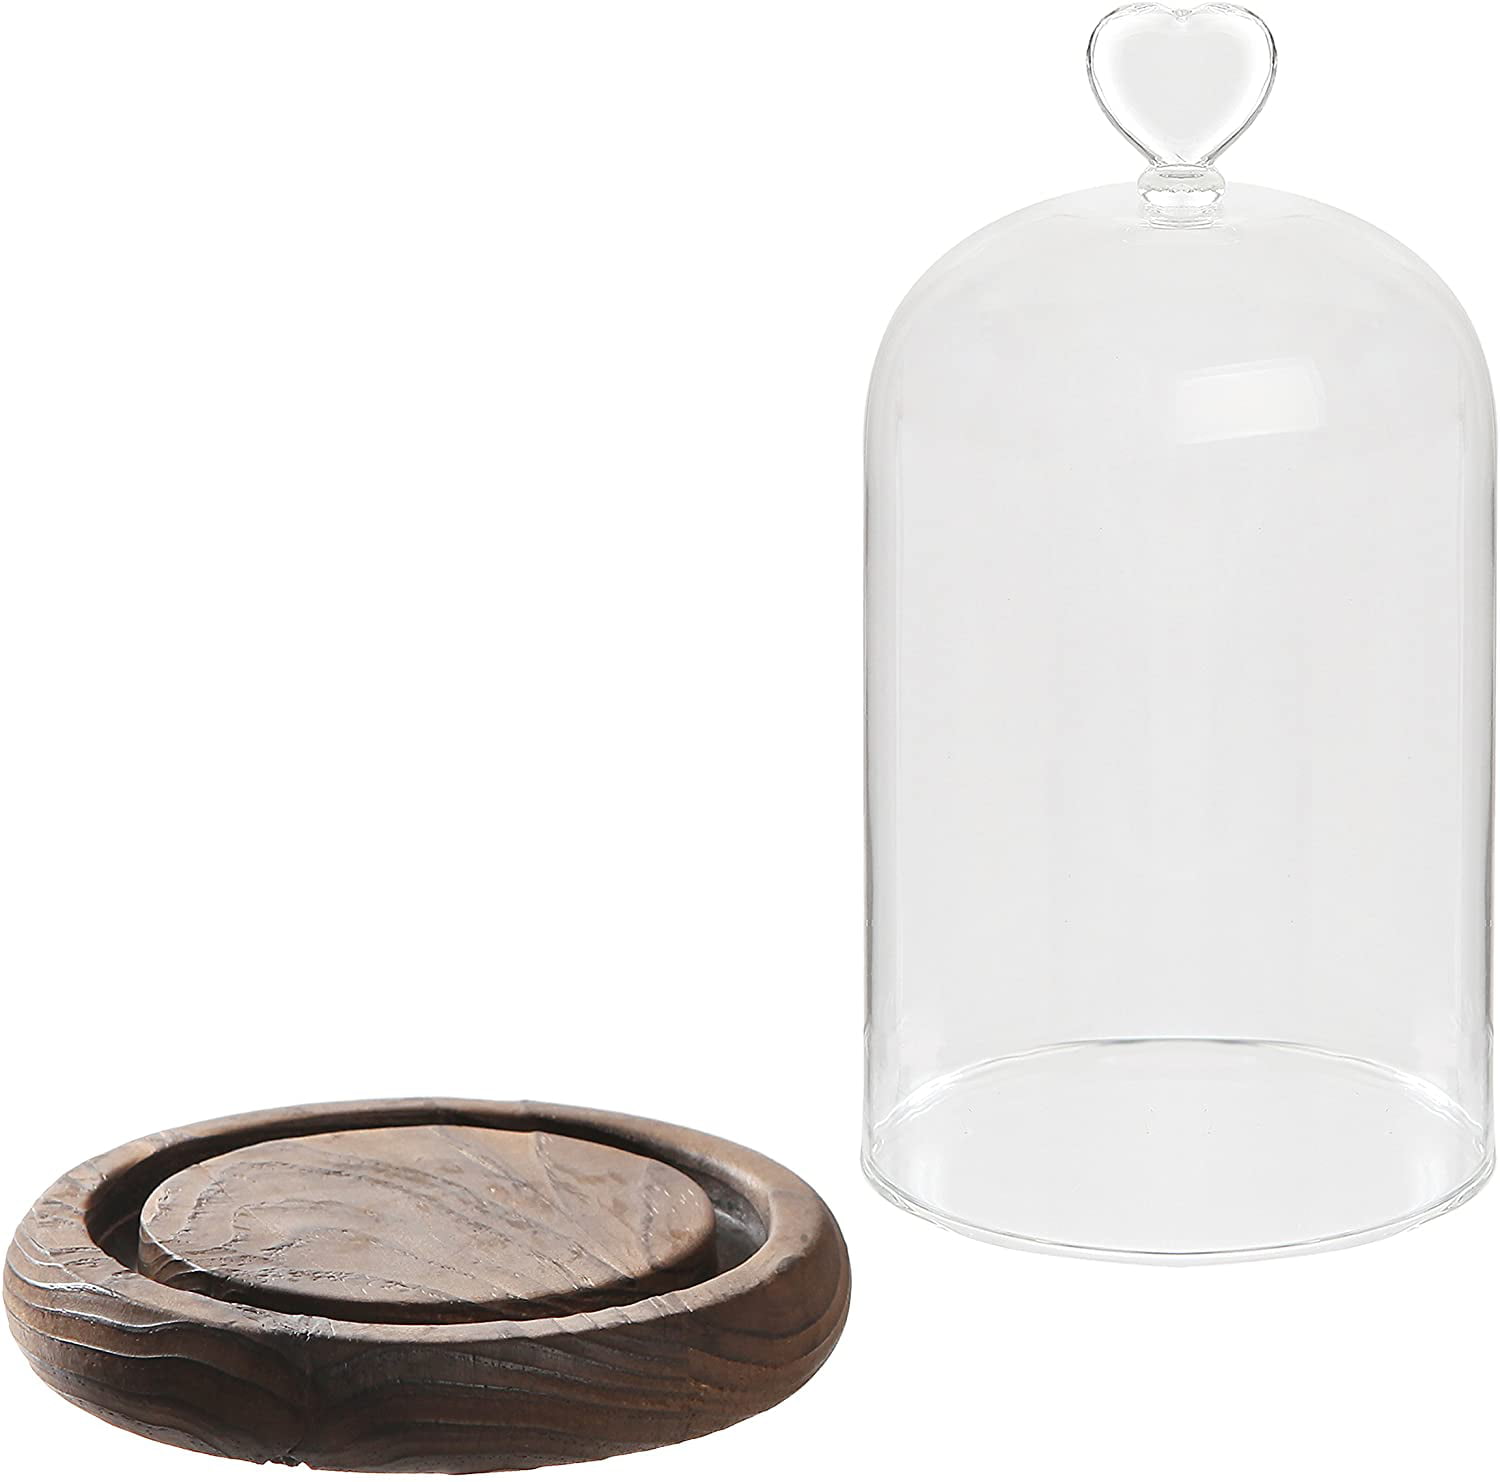 MyGift 7-inch Clear Glass Display Cloche Dome with Brown Wood Base 